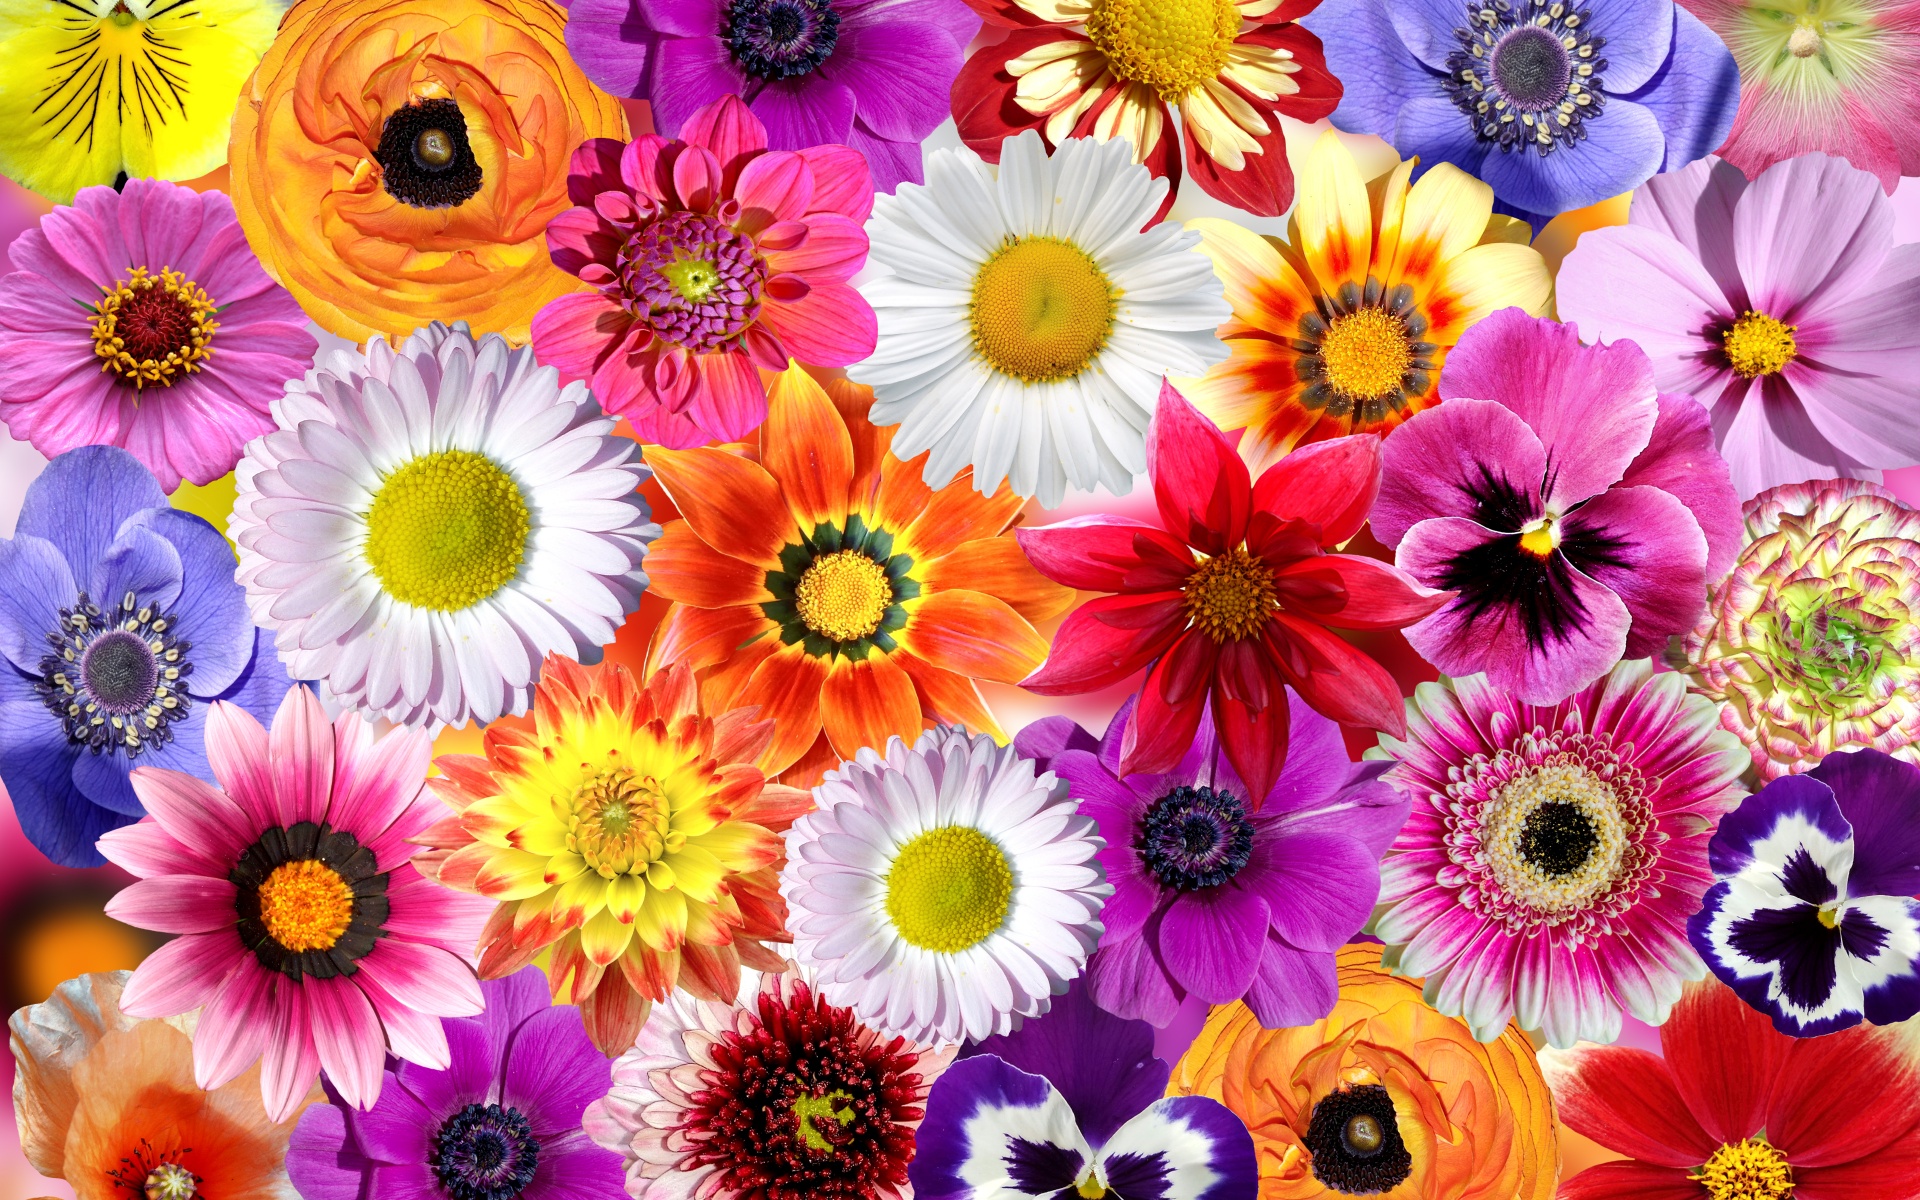 Daisy flowers Wallpaper 4K, Floral Background